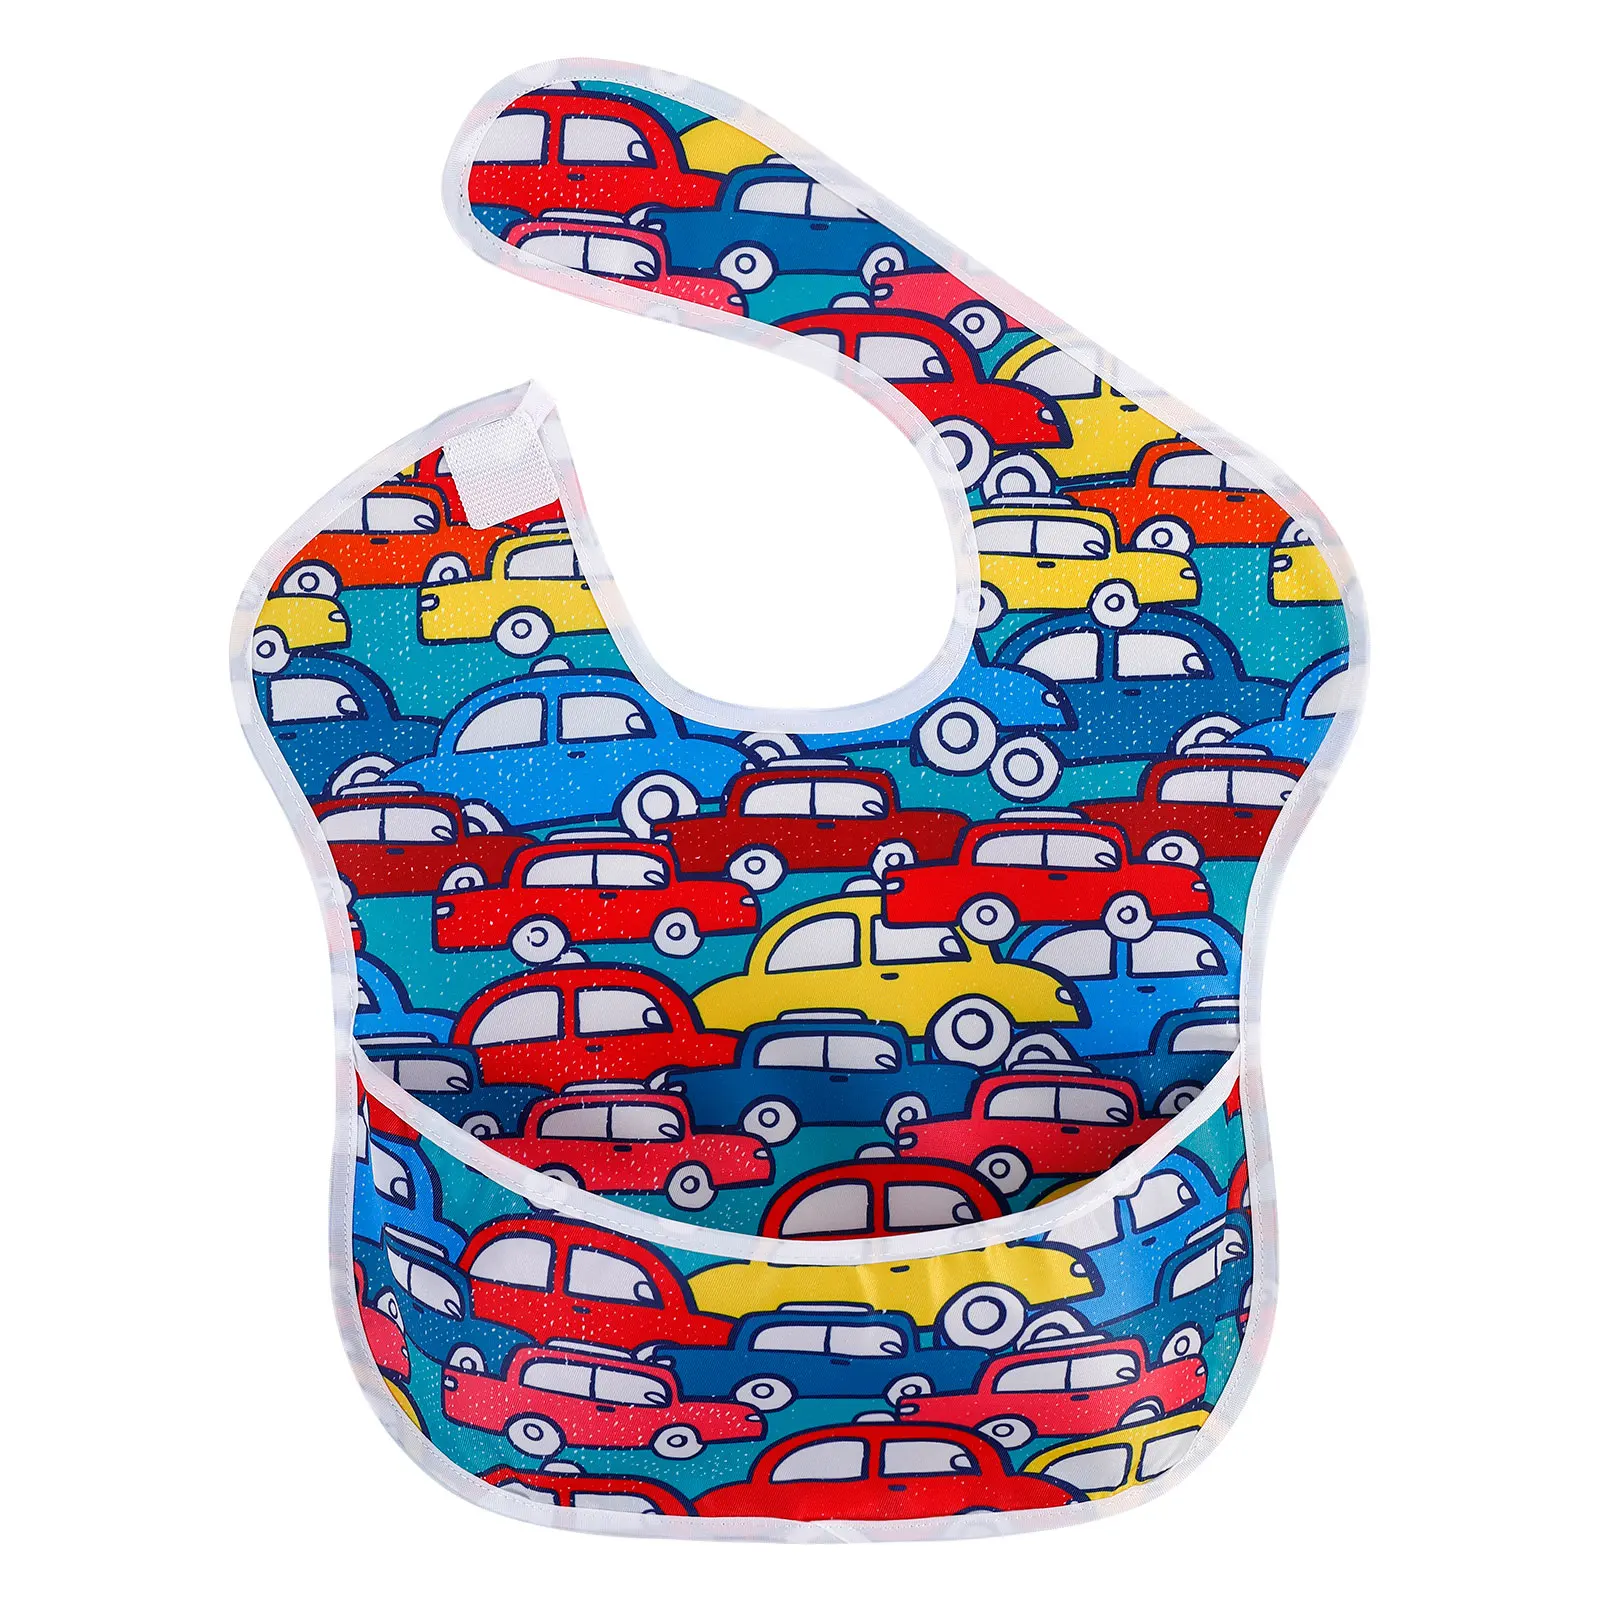 baby accessories carry bag	 Waterproof Baby Bibs 100% Polyester TPU Coating Feeding Bibs Washable Baby Bibs with Food Catcher for Baby Girls & Boys child safety seat Baby Accessories